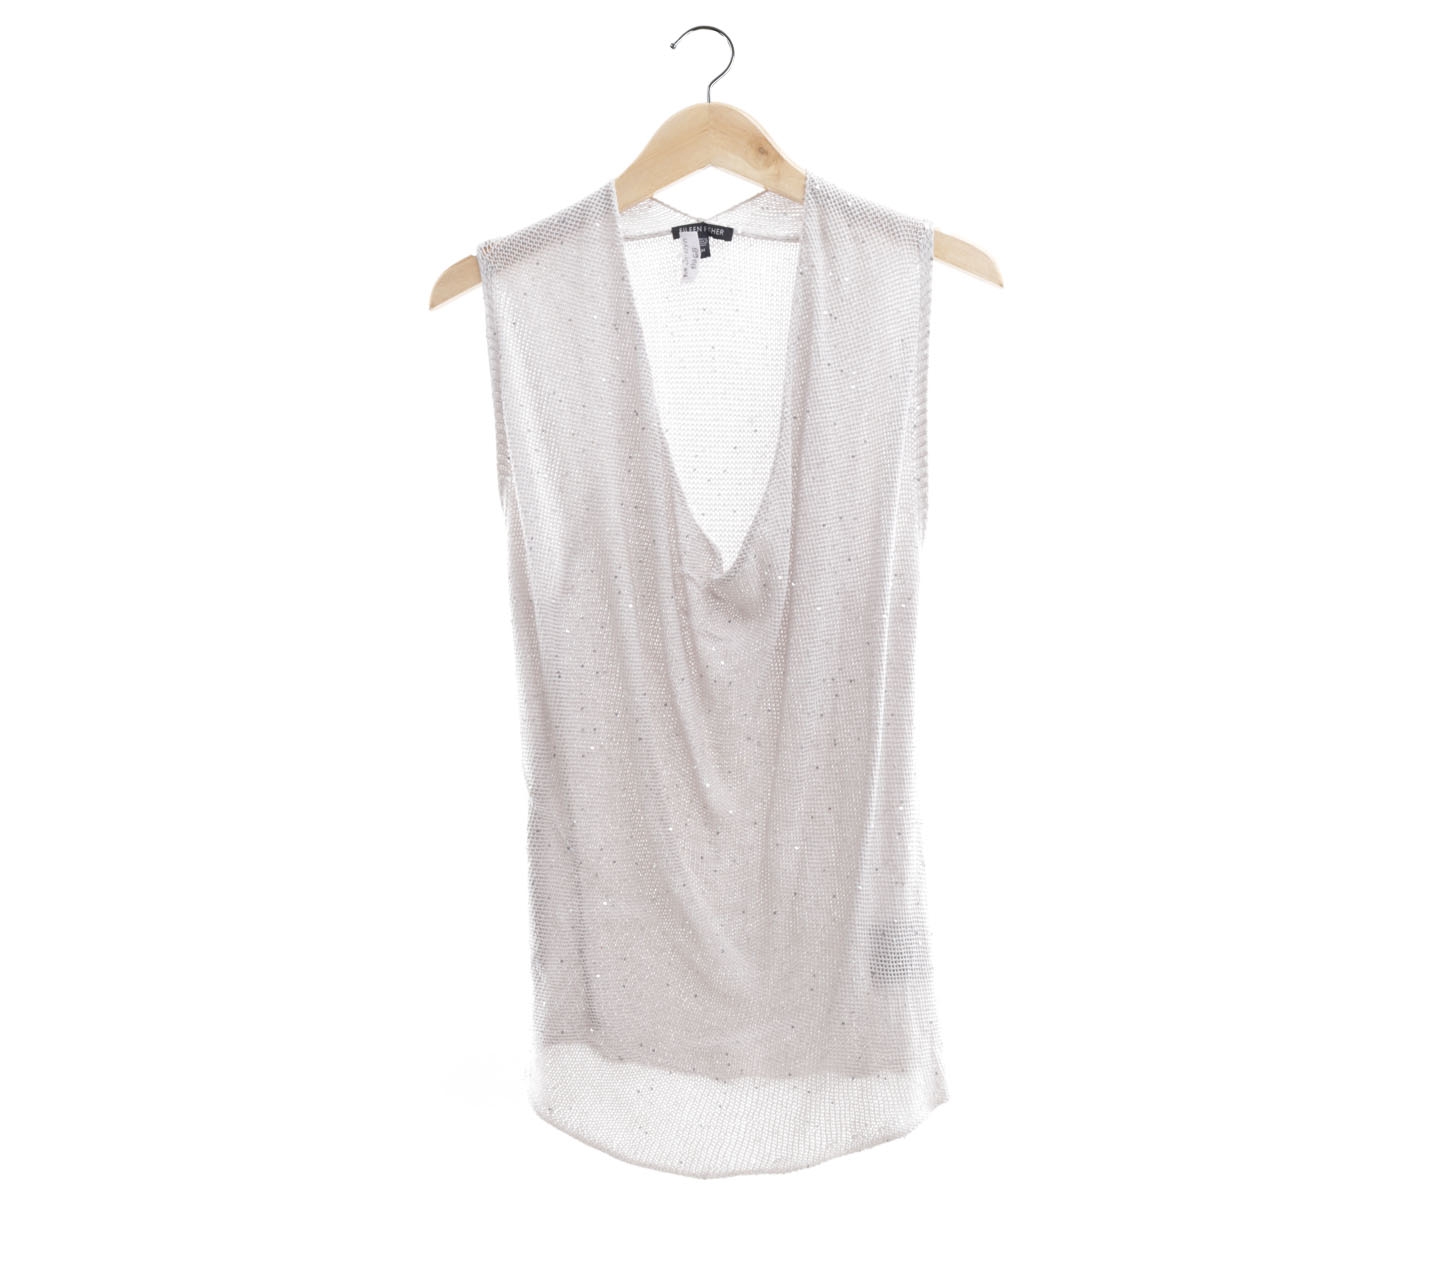 Eileen Fisher Light Grey Knit With Sequins Sleeveless